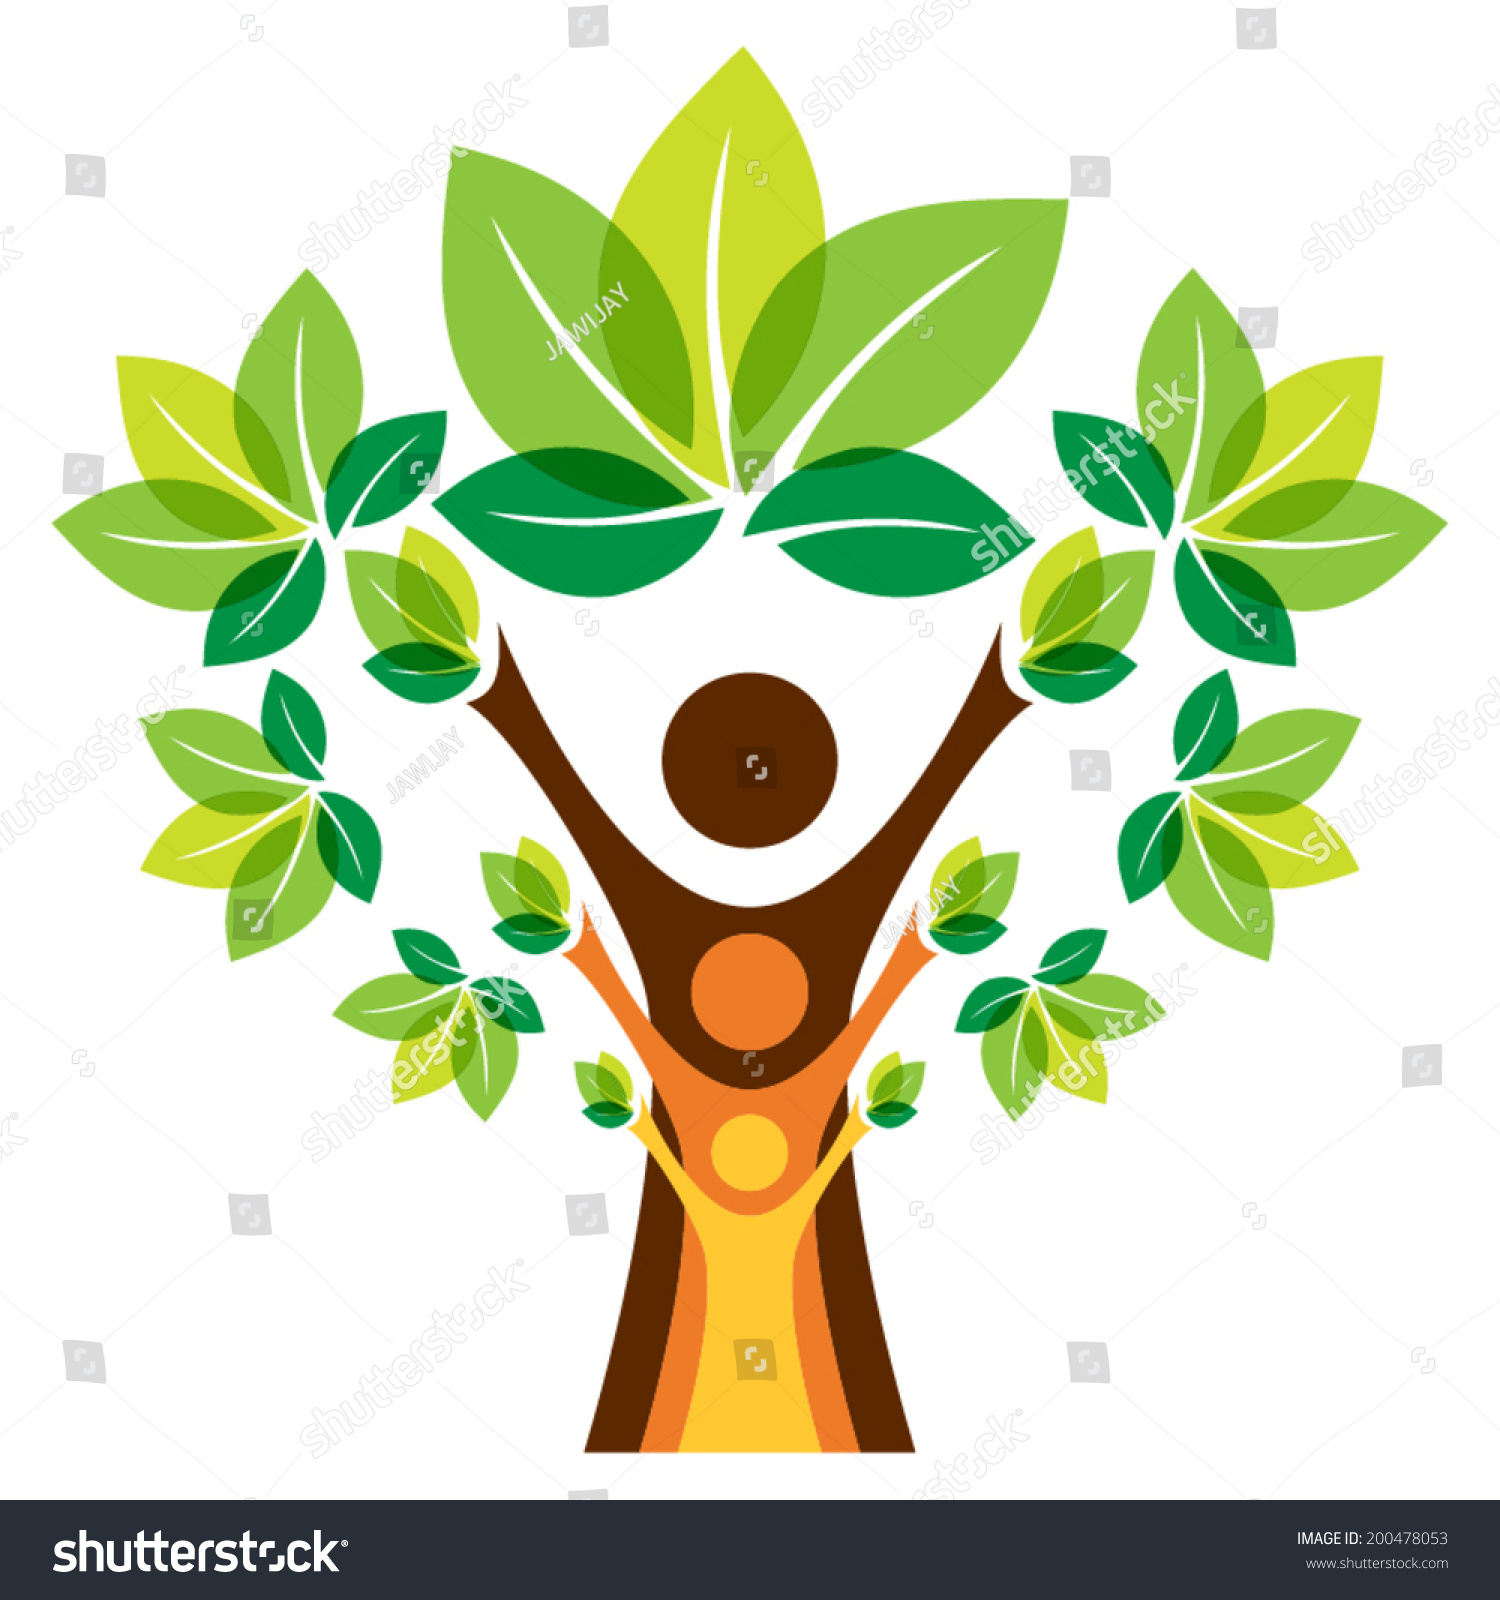 growing tree clipart - photo #19